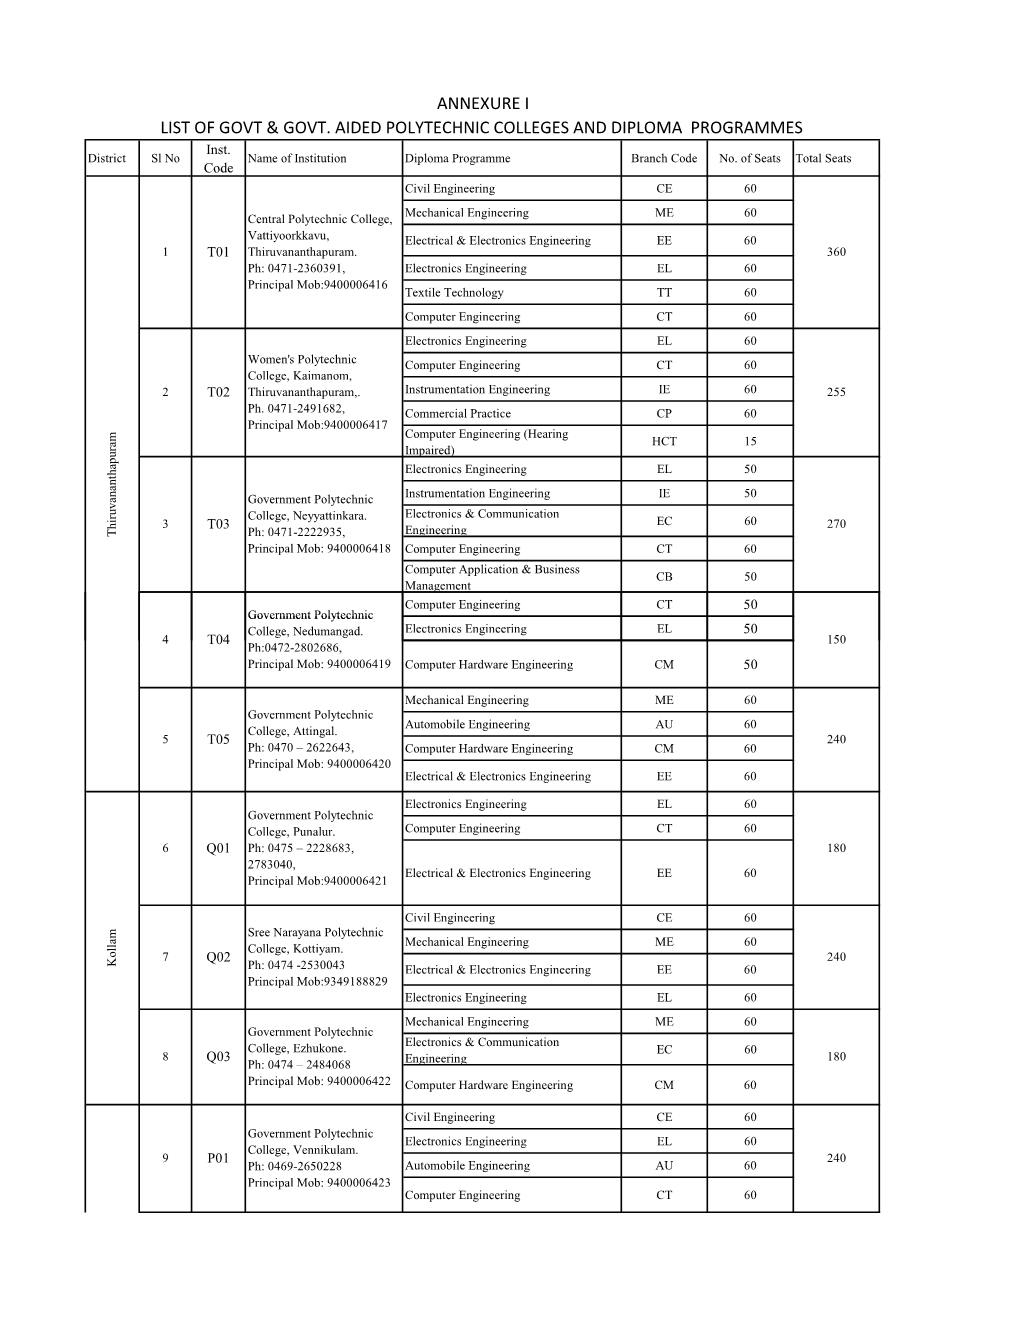 List of Polytechnic Colleges, Programmes